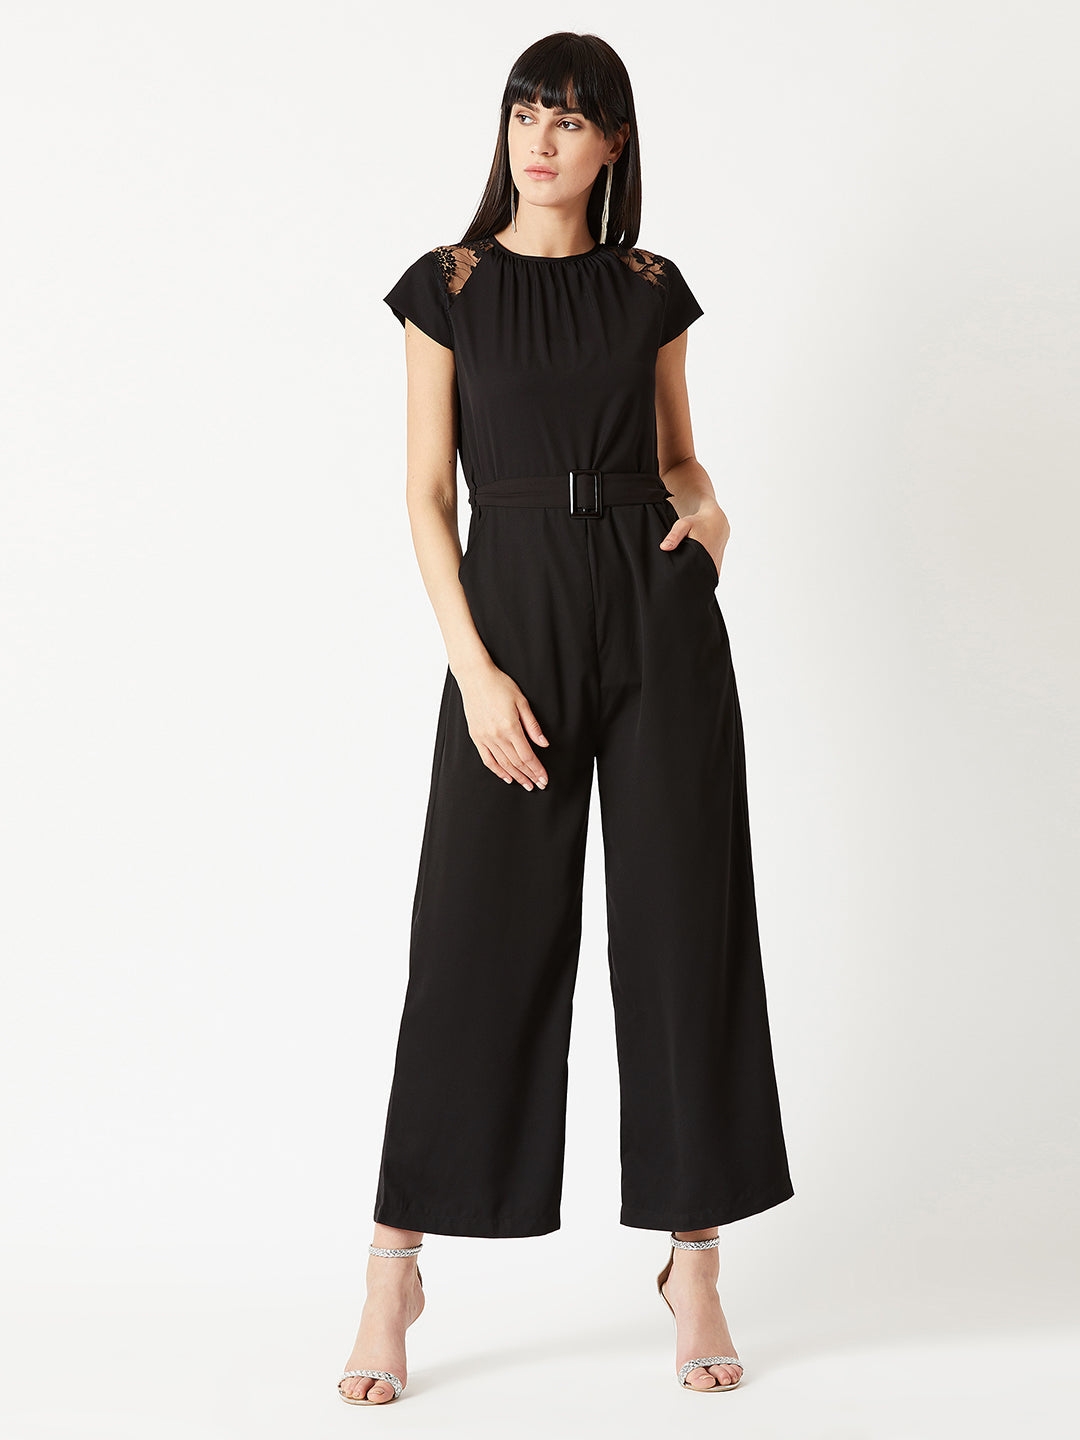 Black Round Neck Cap Sleeve Solid Straight Leg Belted Maxi Jumpsuit